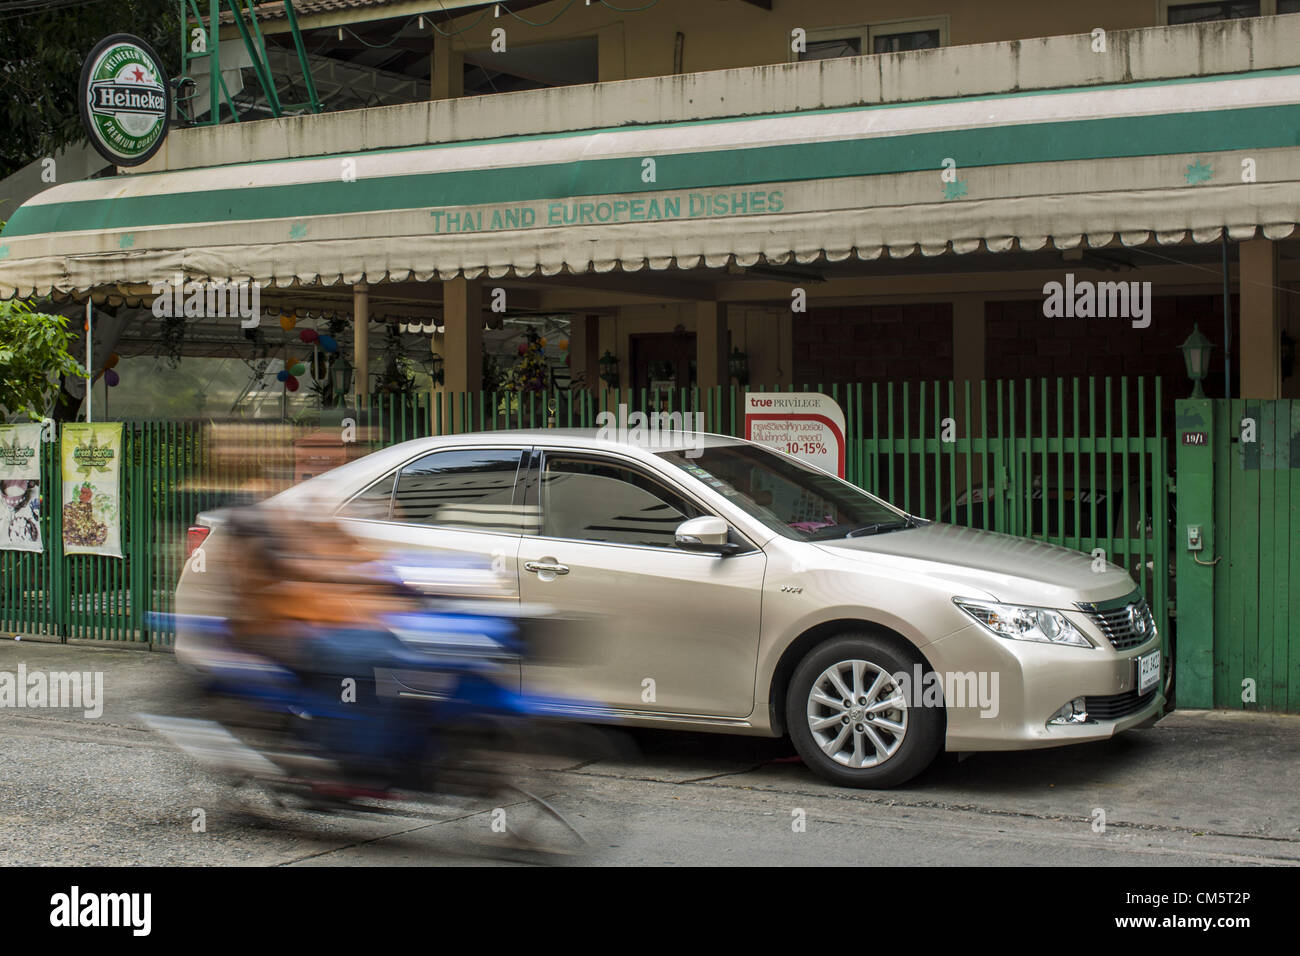 Oct. 11, 2012 - Bangkok, Thailand - A motorcycle taxi passes a Toyota Camry on a street in Bangkok, Thailand. About 160,000 units of Toyota's popular Camry and Corolla models produced between March 21, 2006 and May 31, 2010 in Thailand are part of Toyota Motor's global recall. Toyota Motor Corp said yesterday it would recall more than 7.4 million vehicles worldwide because the faulty power window switch was a potential fire hazard, the latest in a series of setbacks that have dented the reputation of Japan's biggest automaker. The voluntary move is the biggest single recall since Ford pulled 8 Stock Photo